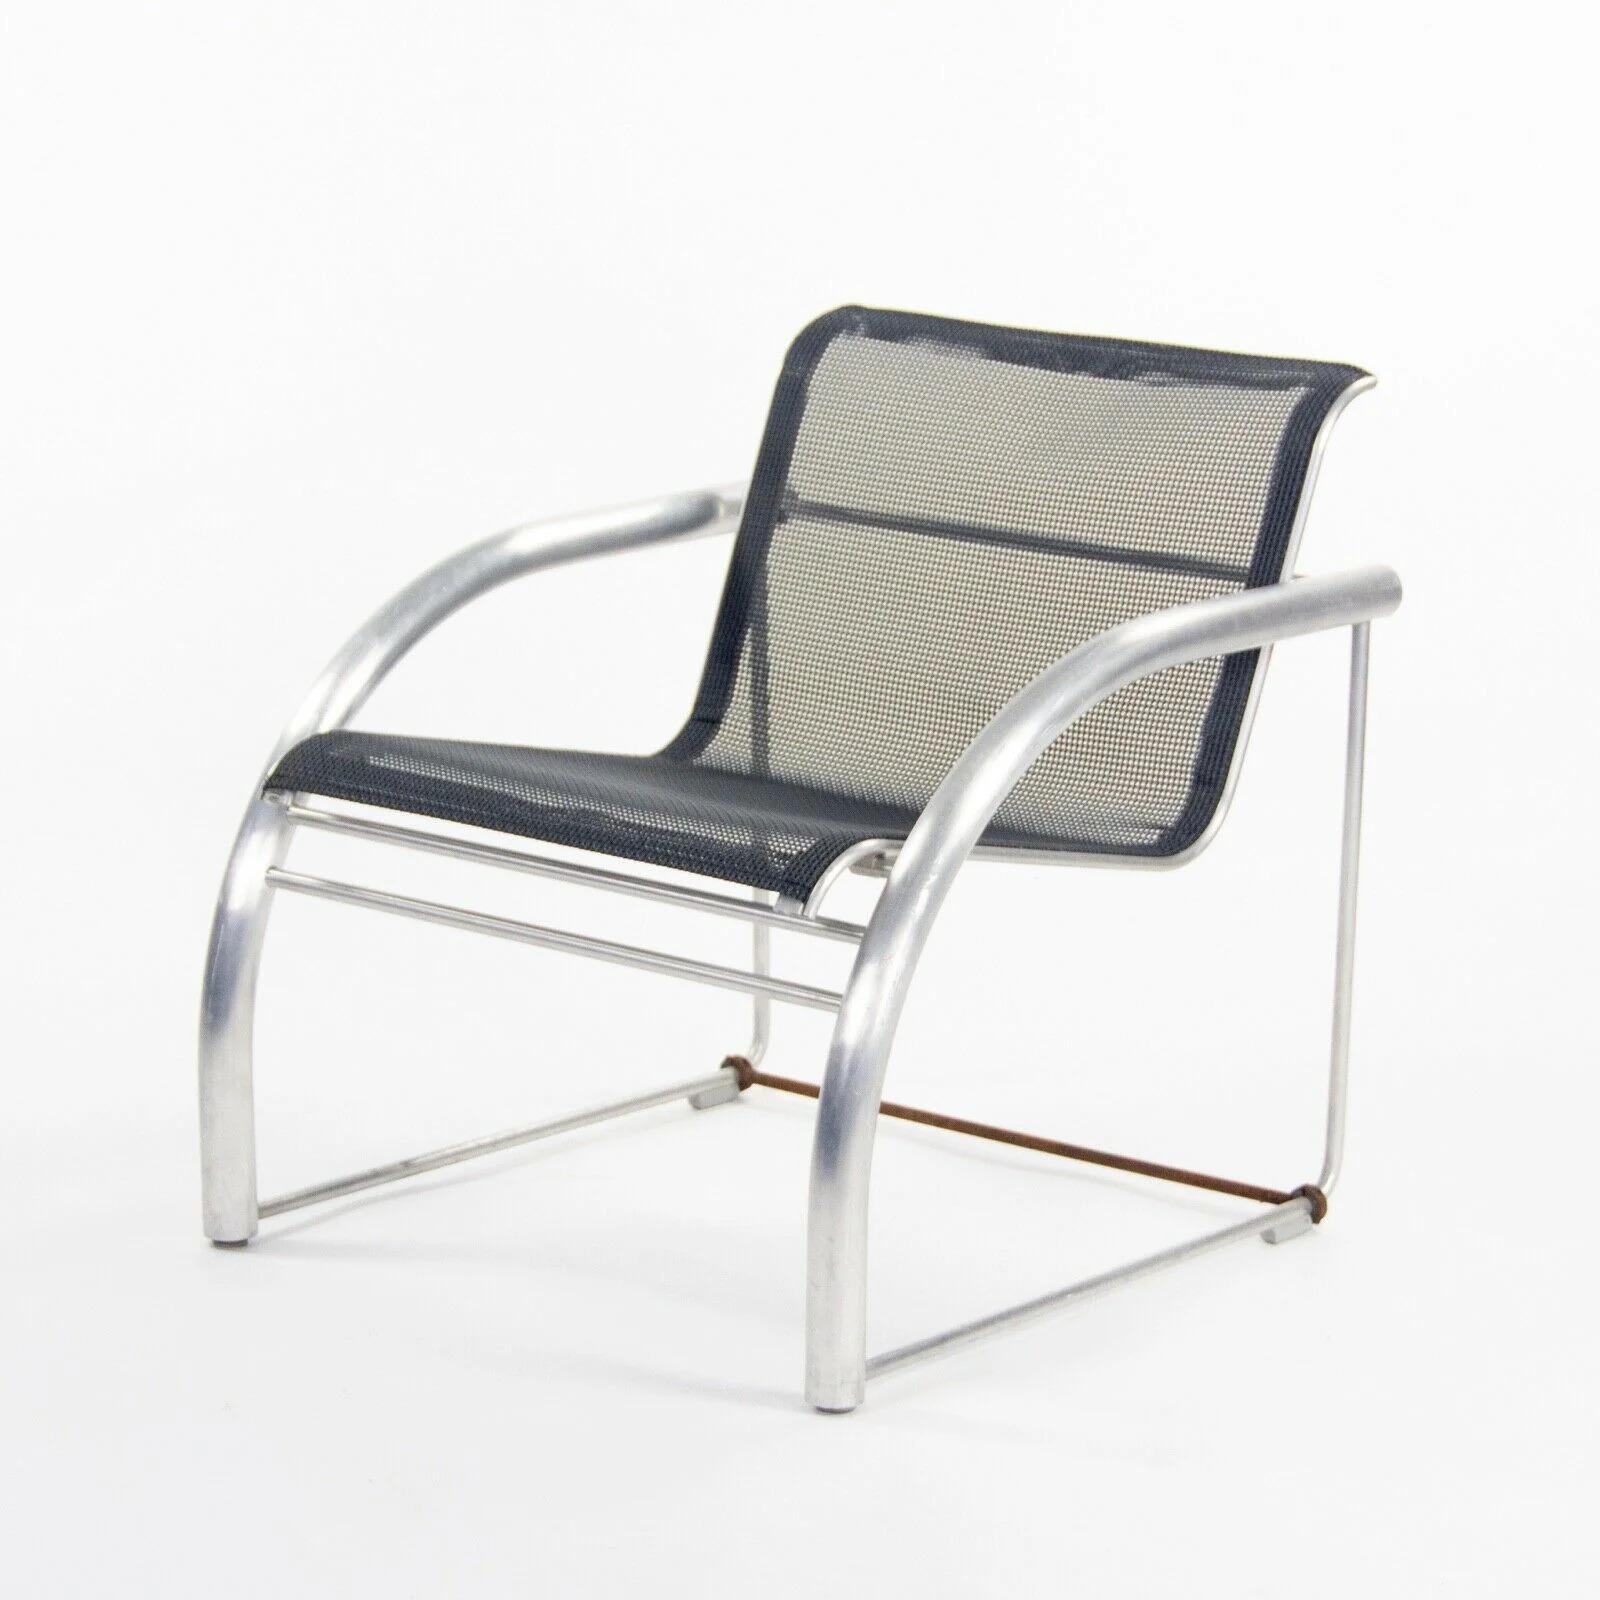 2011 Prototype Richard Schultz Mateo Collection Raw Aluminum & Mesh Dining Chair For Sale 3